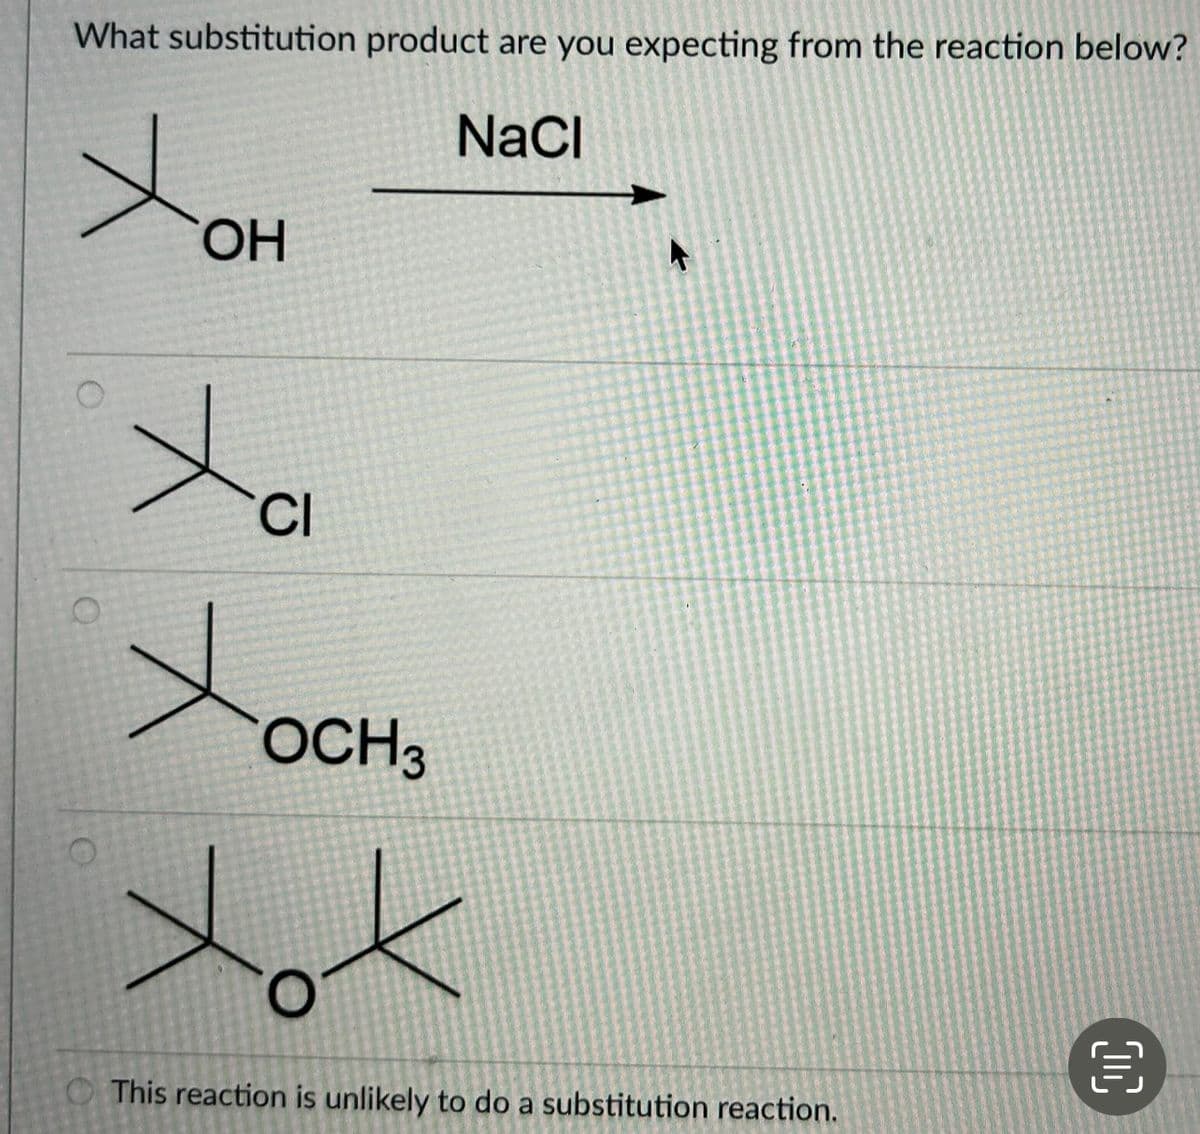 What substitution product are you expecting from the reaction below?
NaCl
O
O
O
OH
CI
xo
OCH 3
xox
This reaction is unlikely to do a substitution reaction.
00
€